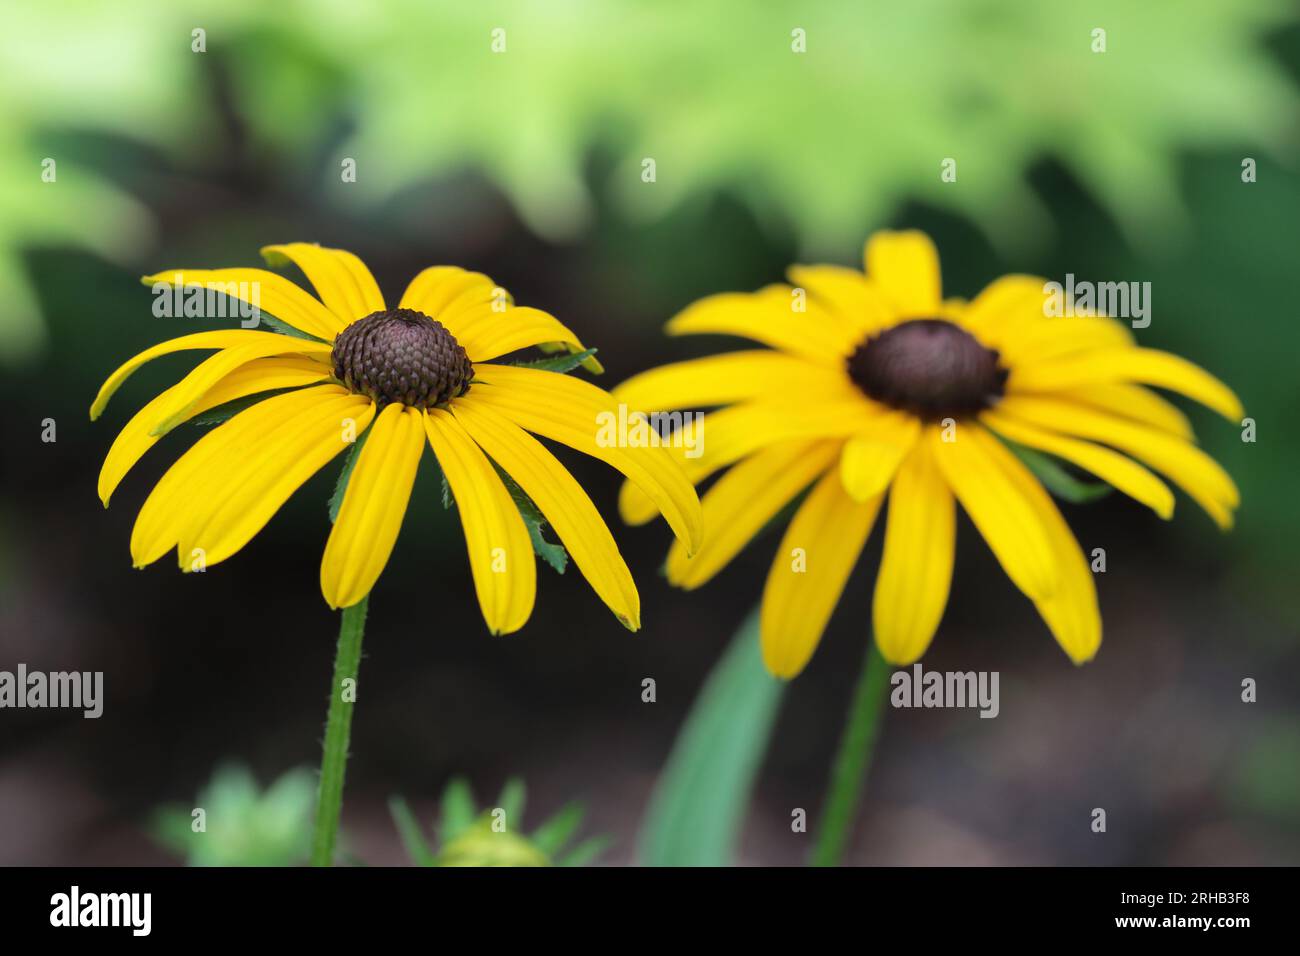 Close-up of two beautiful Rudbeckia fulgida flowers against a green-brown blurry background, selective focus Stock Photo